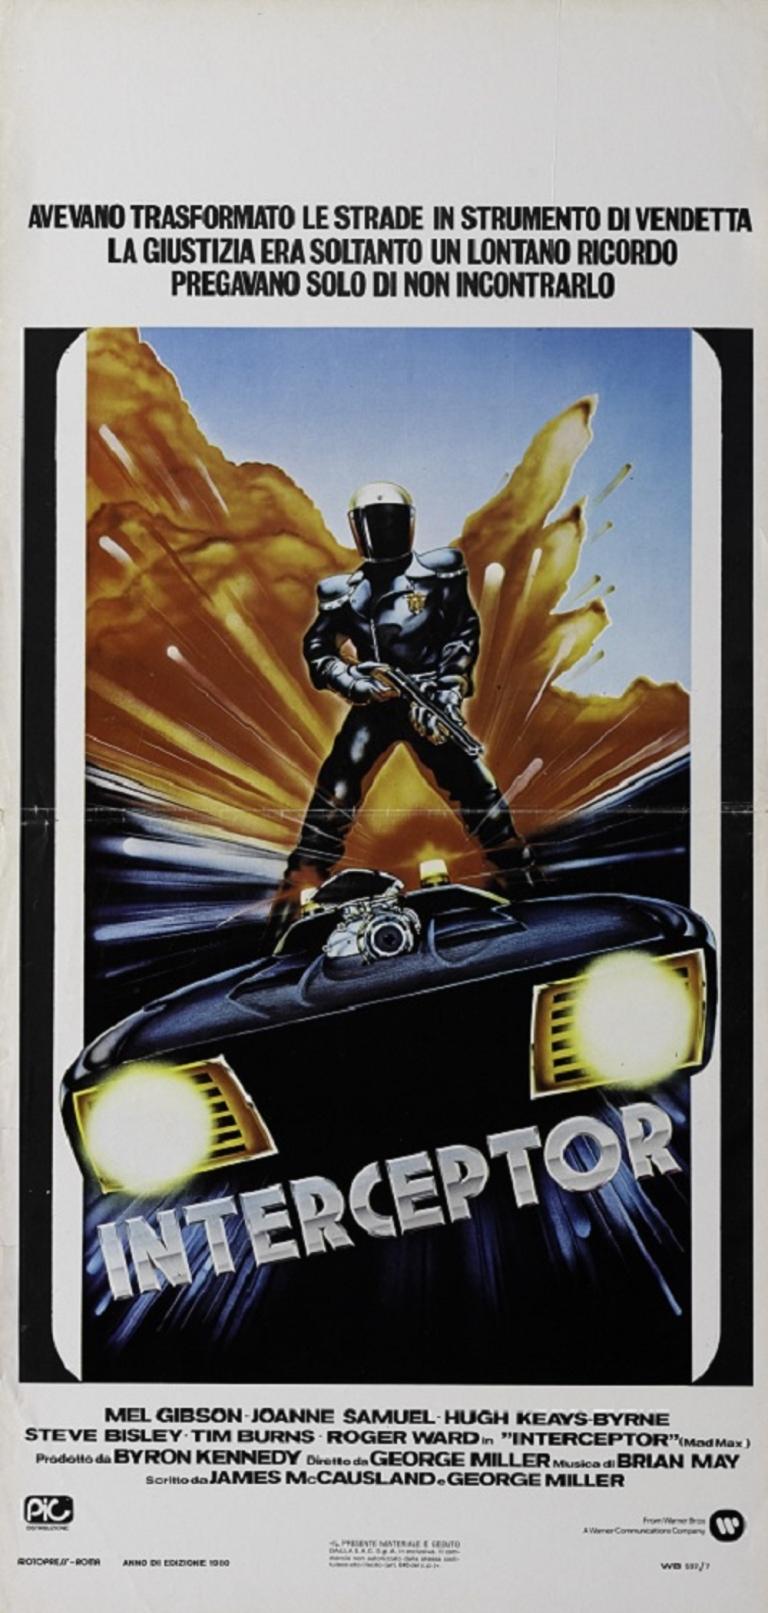 Black clad figure with shot gun atop a vehicle seen front on, in the background is an explosion, below in metallic text is the title 'Interceptor'.